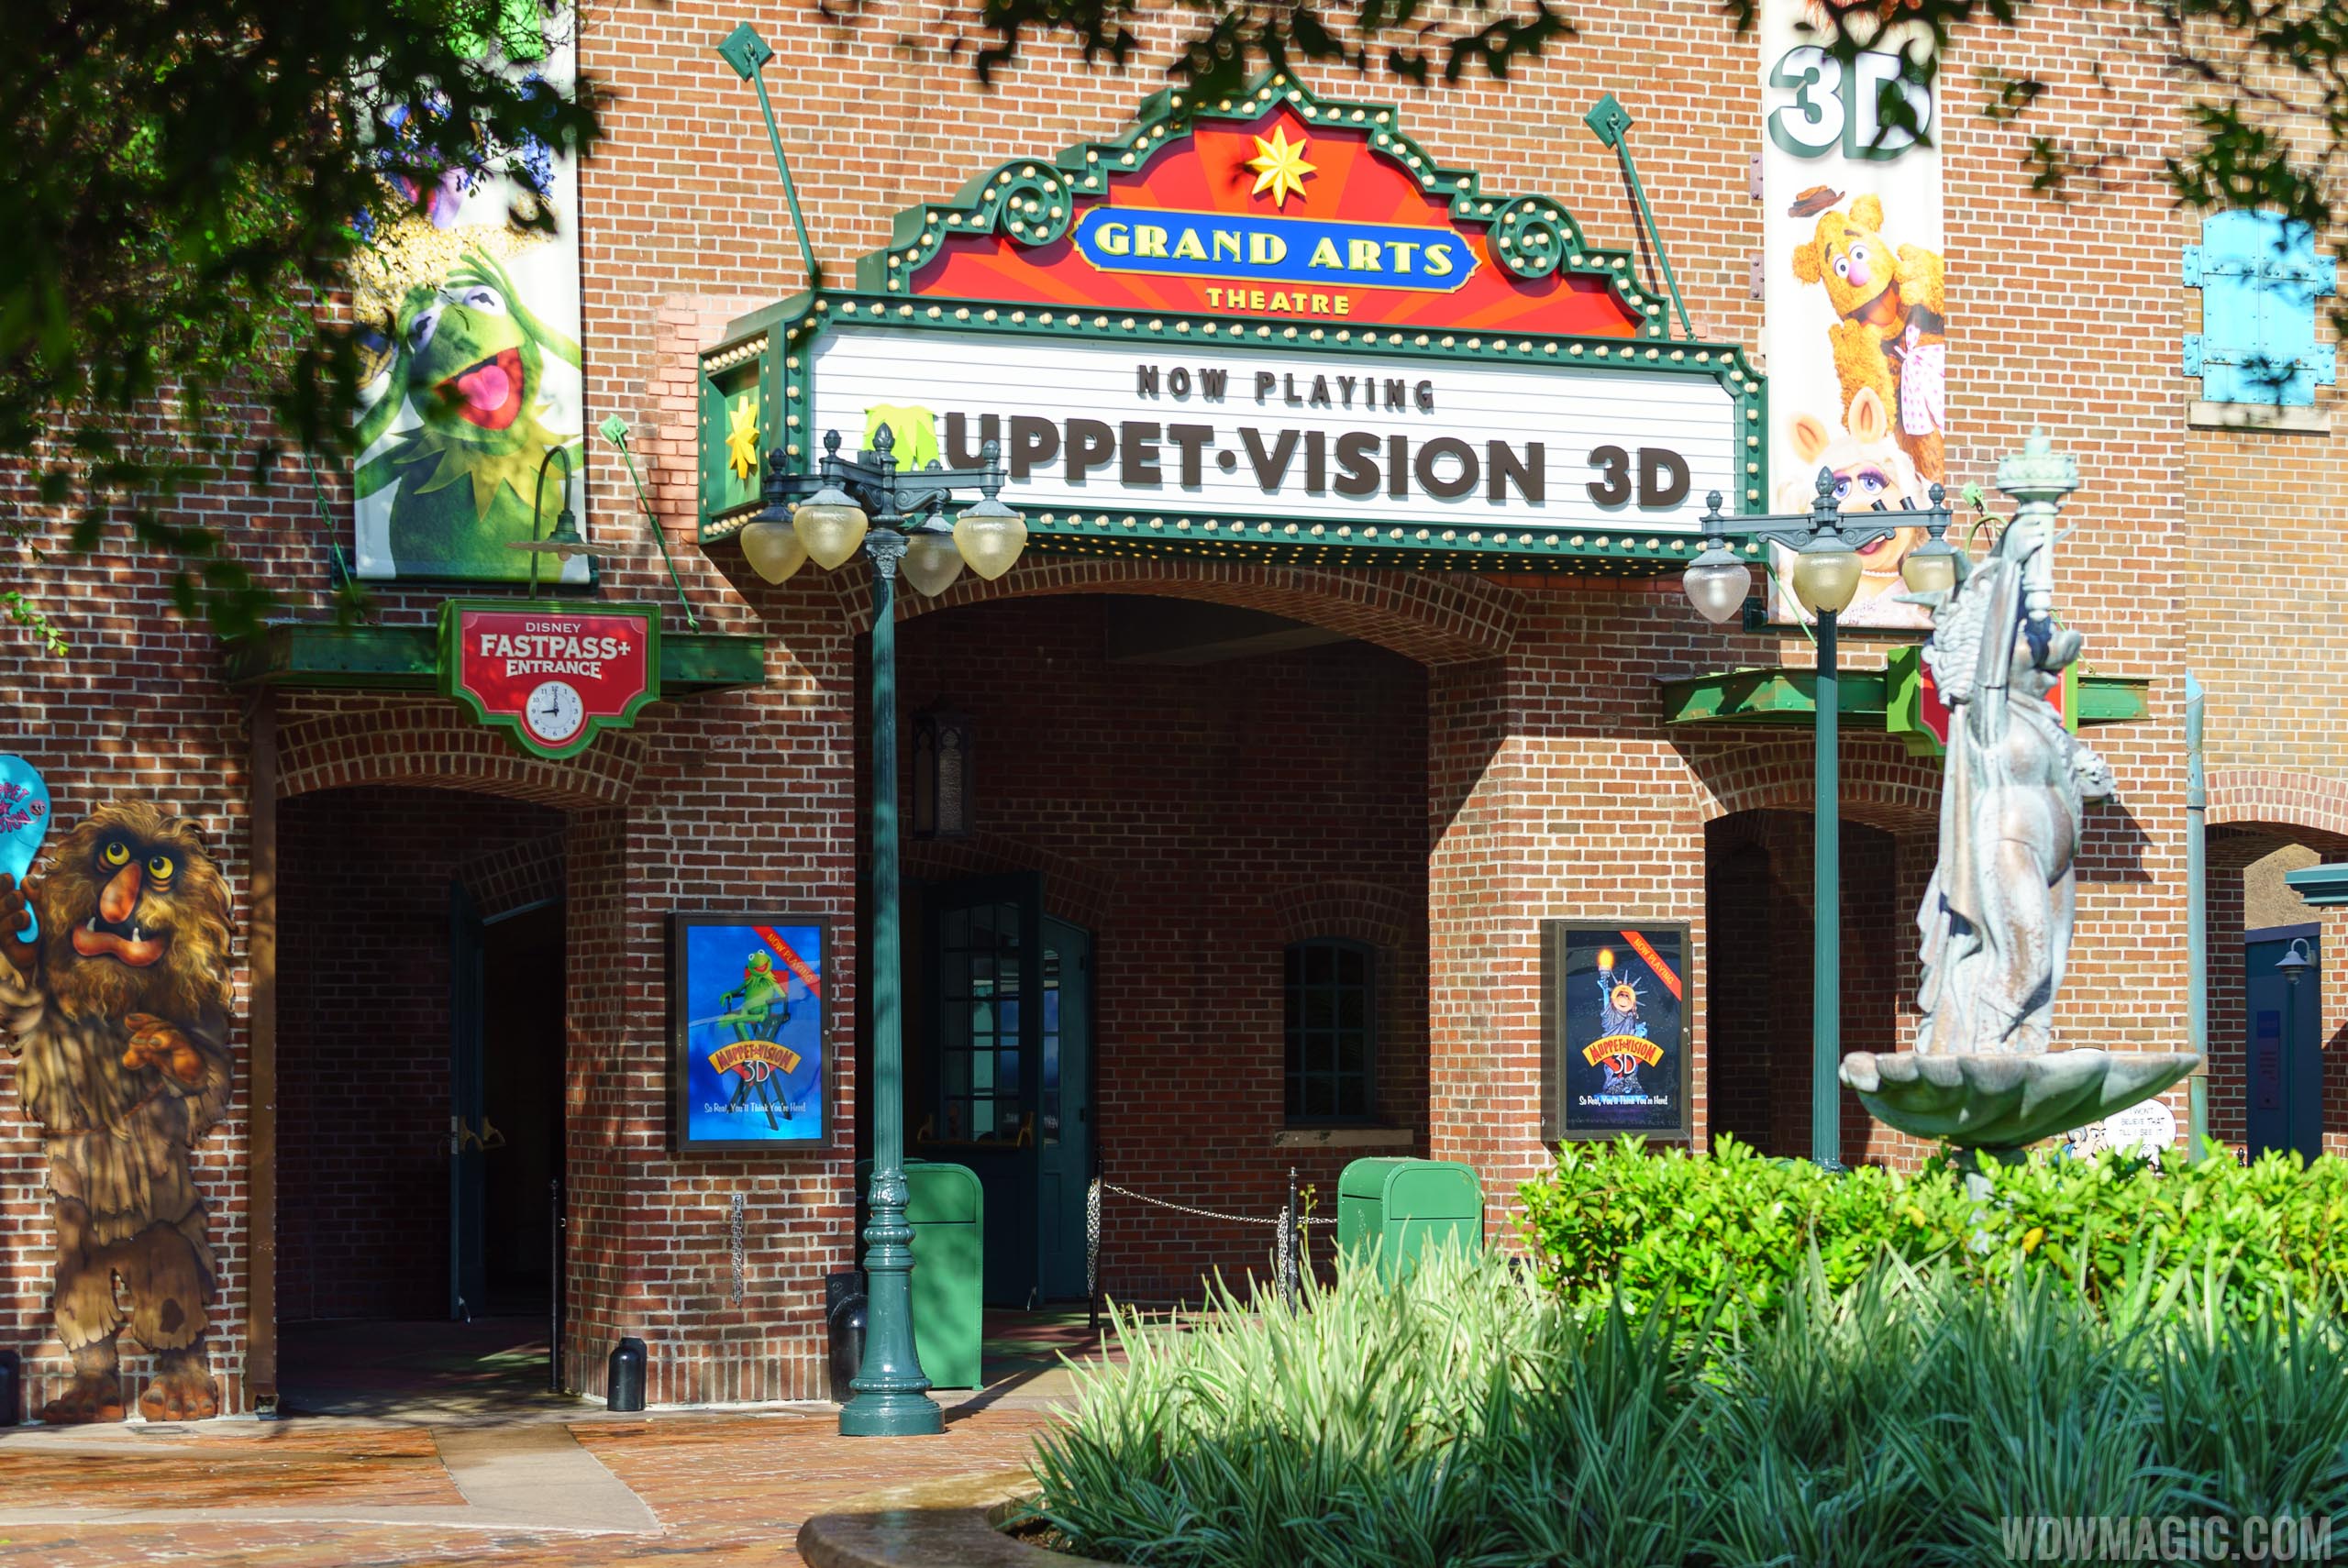 New visual effect debuts in Muppet*Vision 3D at Walt Disney World